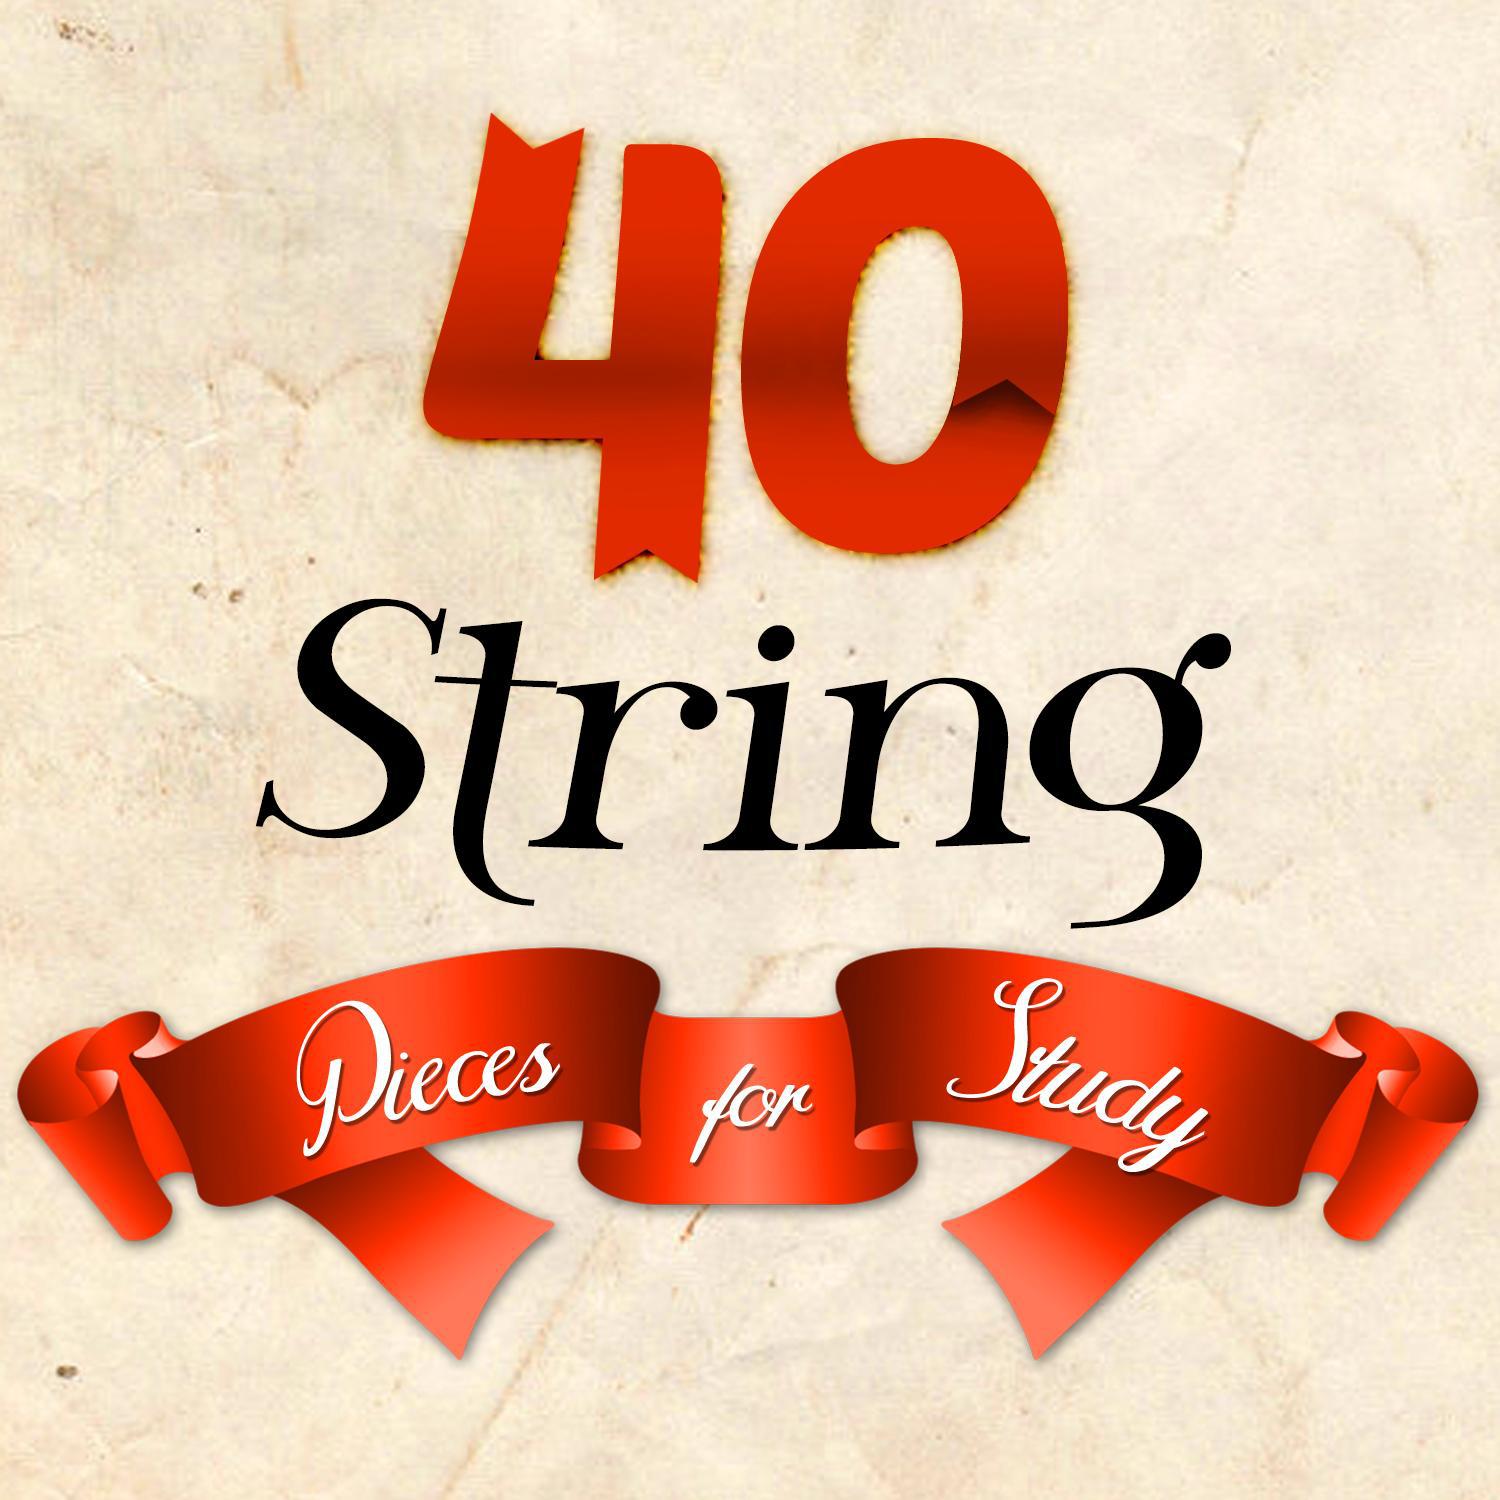 40 String Pieces for Study专辑